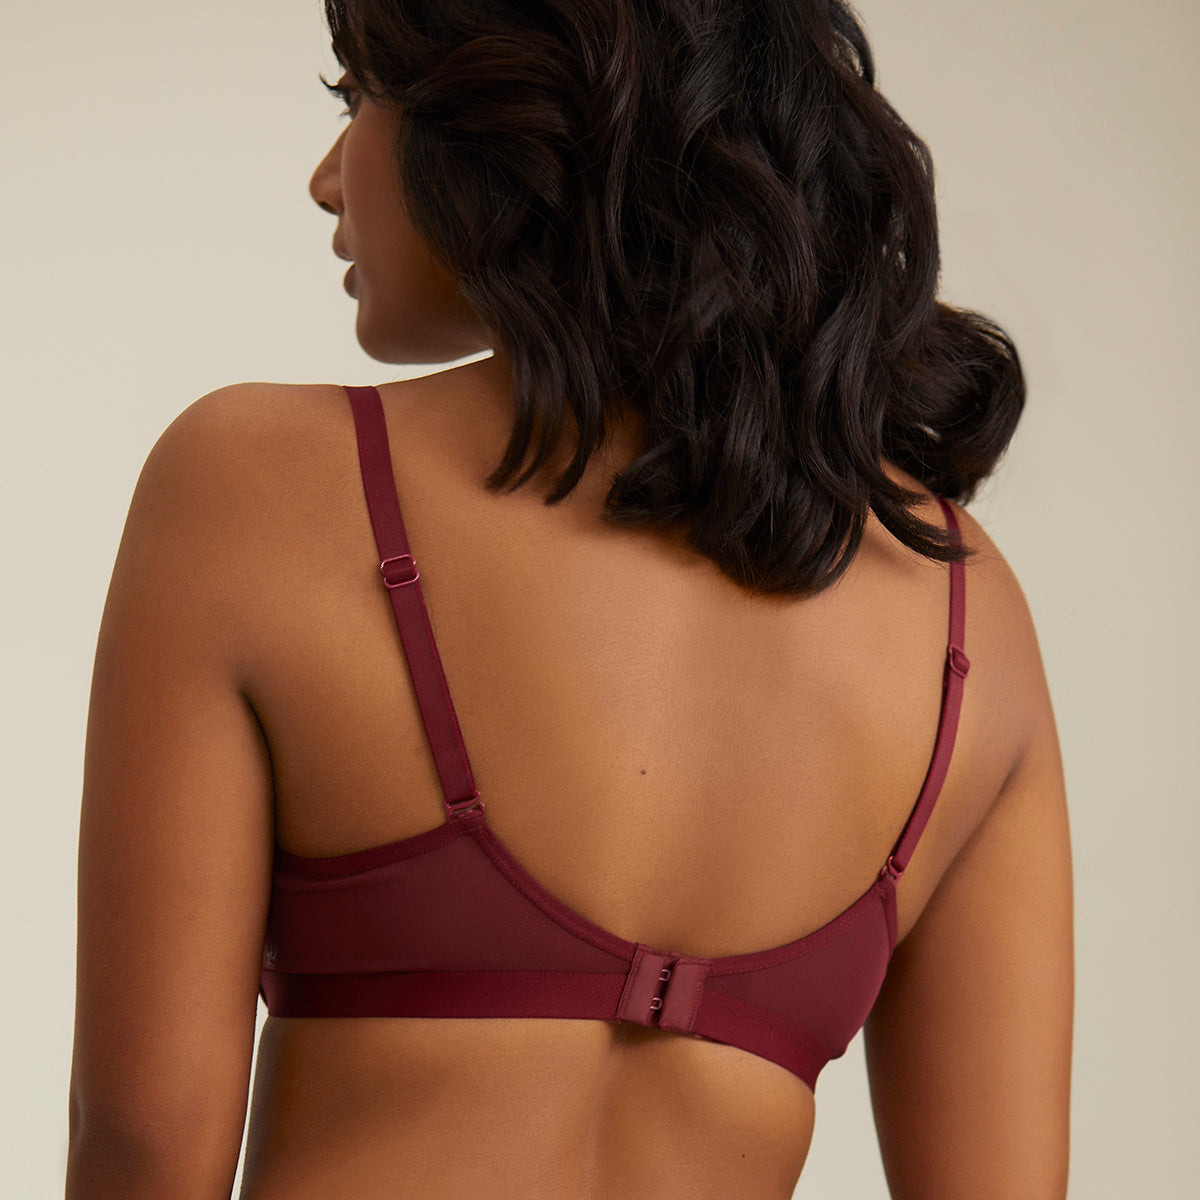 Breathe Cotton Padded wired Push up level-2 bra Demi coverage - Maroon NYB005